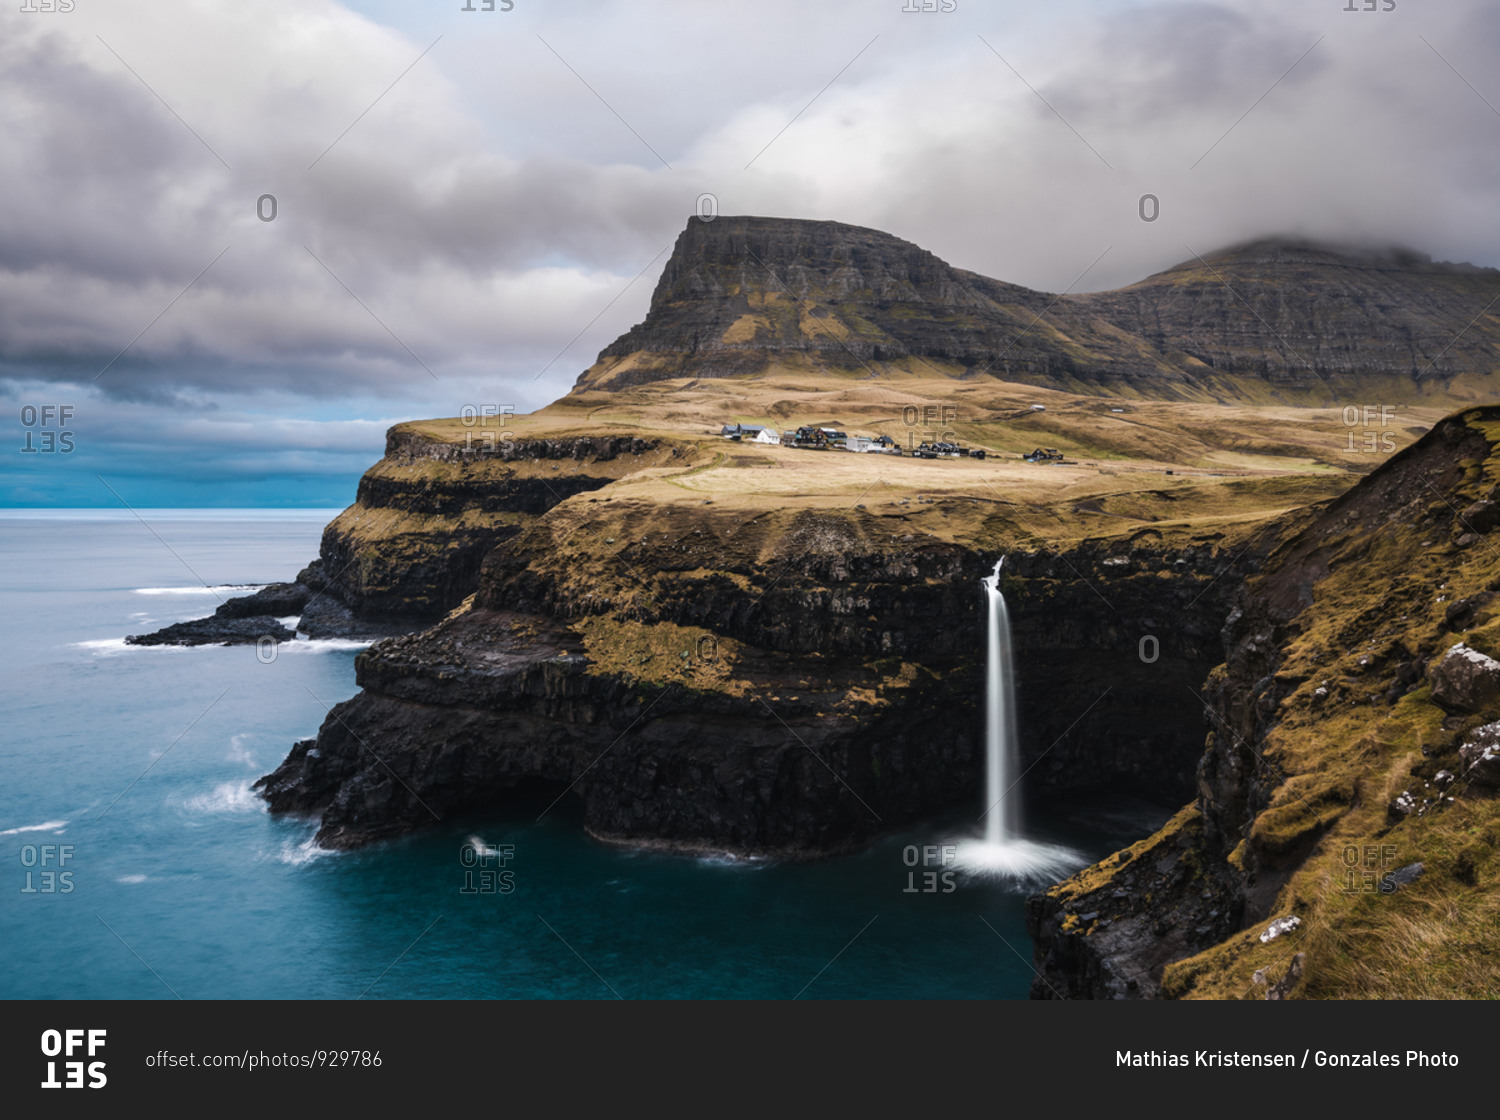 The Mulafossur Waterfall at Gasadalur in the Faroe Islands
stock photo - OFFSET